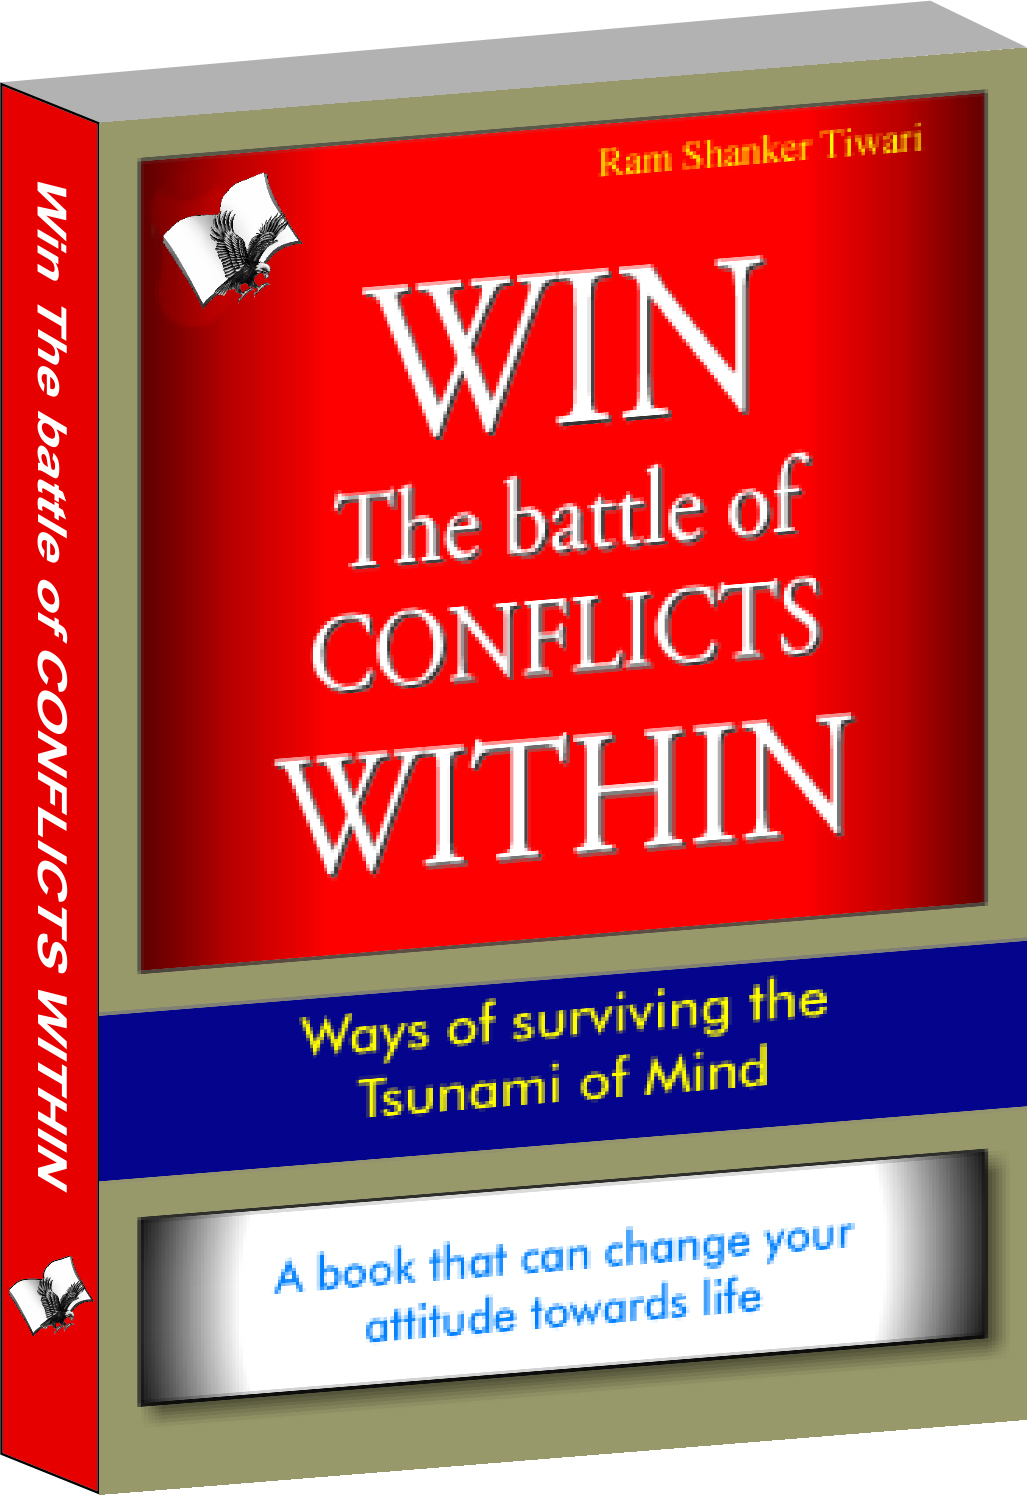 Win The Battle Of Conflicts Within-Ways of surviving the tsunami of minds